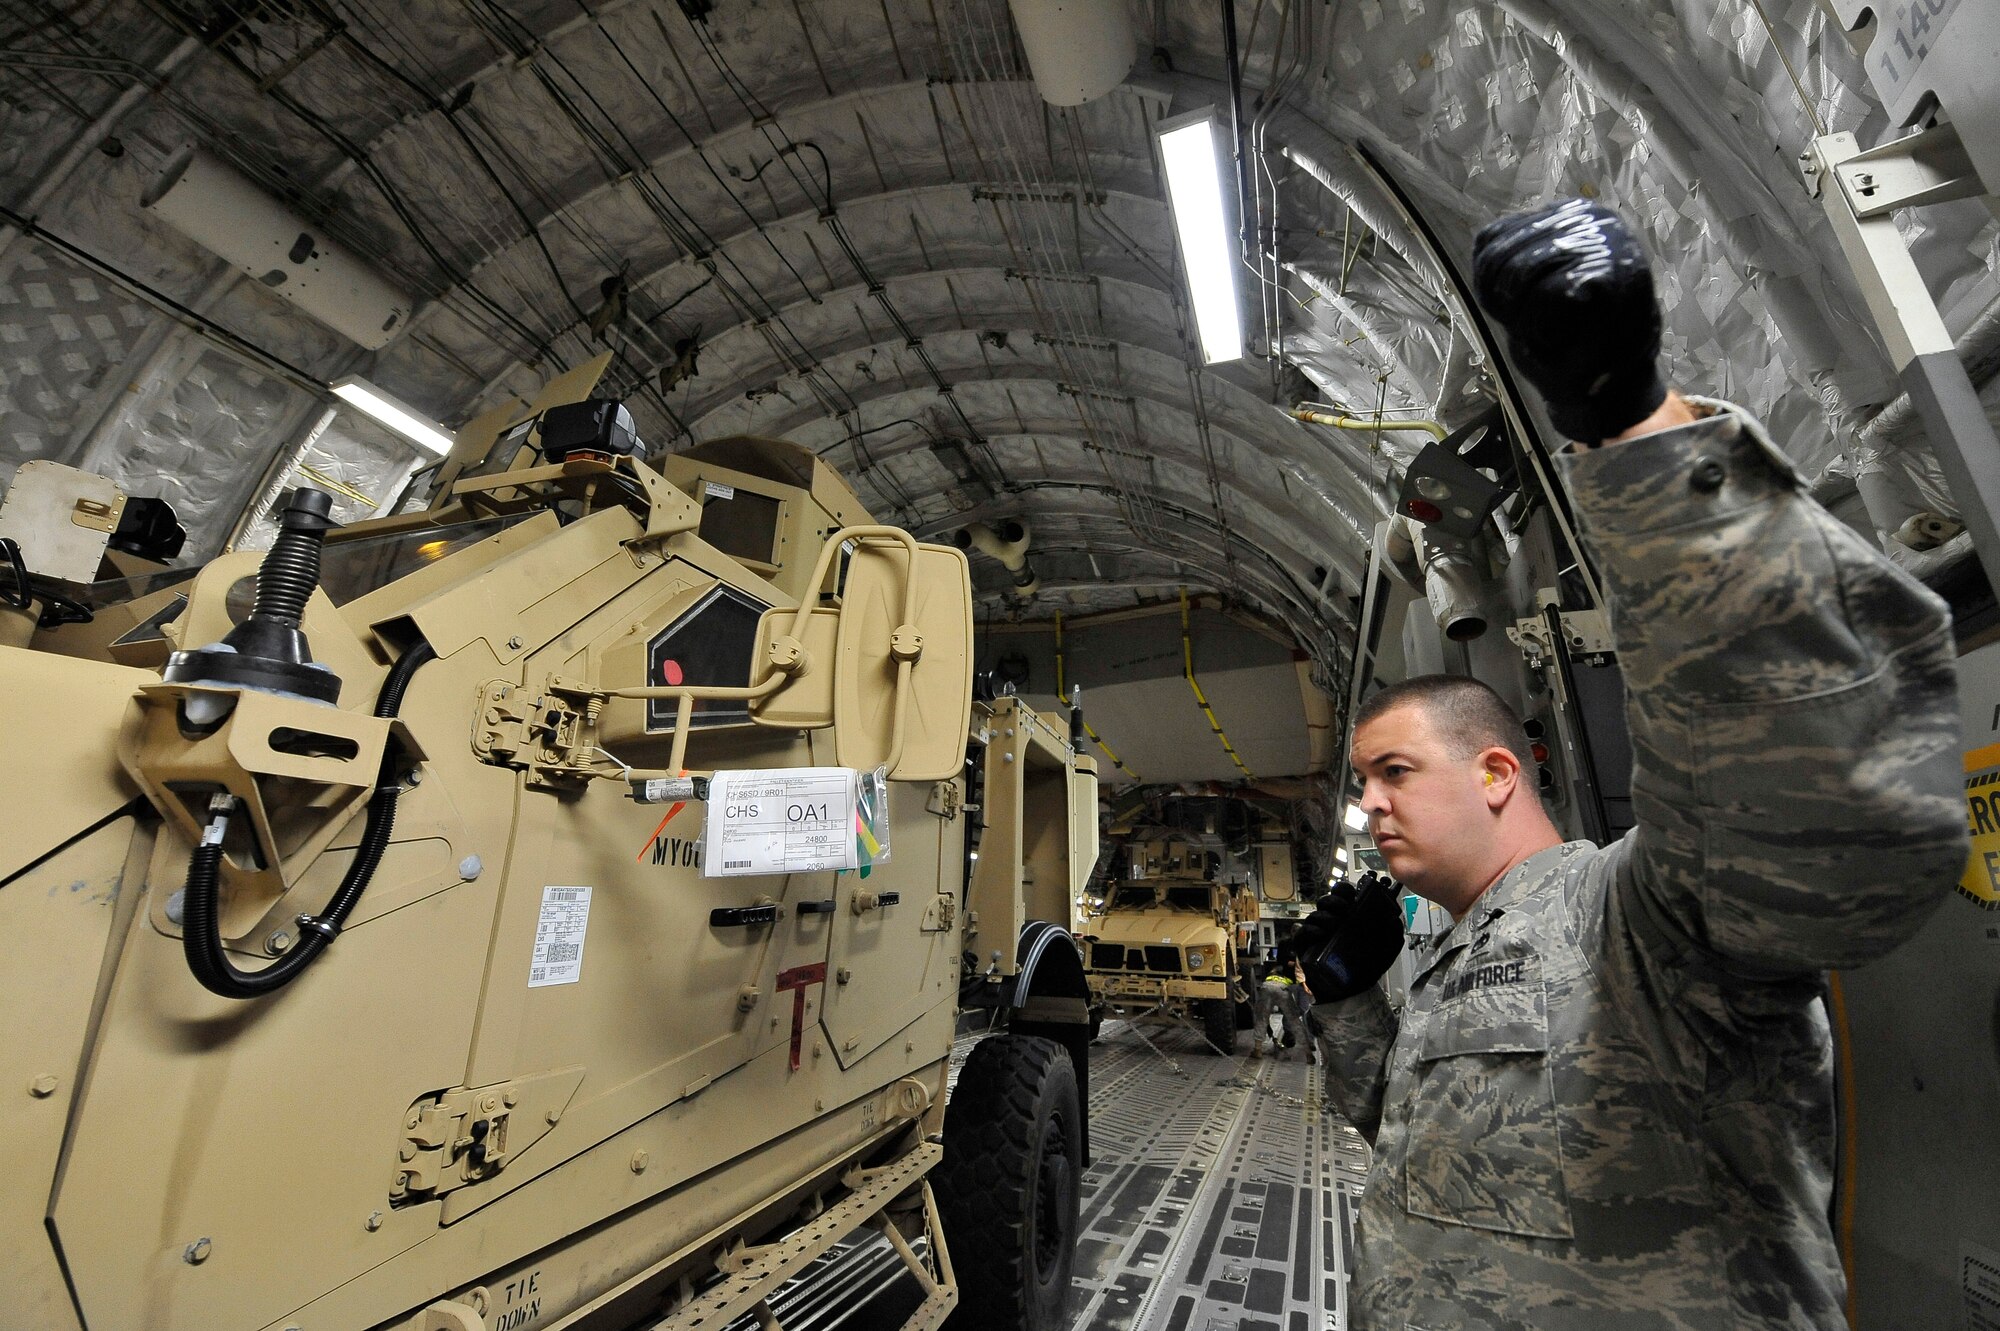 Staff Sgt. Nicholas Reddin serves as a clearance spotter while one of two mine-resistant, ambush-protected all-terrain vehicles, or M-ATVs, is loaded onto a C-17 Globemaster III at Charleston Air Force Base, S.C., Sept. 30, 2009.  The two M-ATVs are the first to be delivered to the Afghanistan theater for operational use.  Sergeant Reddin is an air transport specialist with the 437th Aerial Port Squadron at Charleston AFB. The C-17 is based out of McChord AFB, Wash.  (U.S. Air Force photo/James M. Bowman)